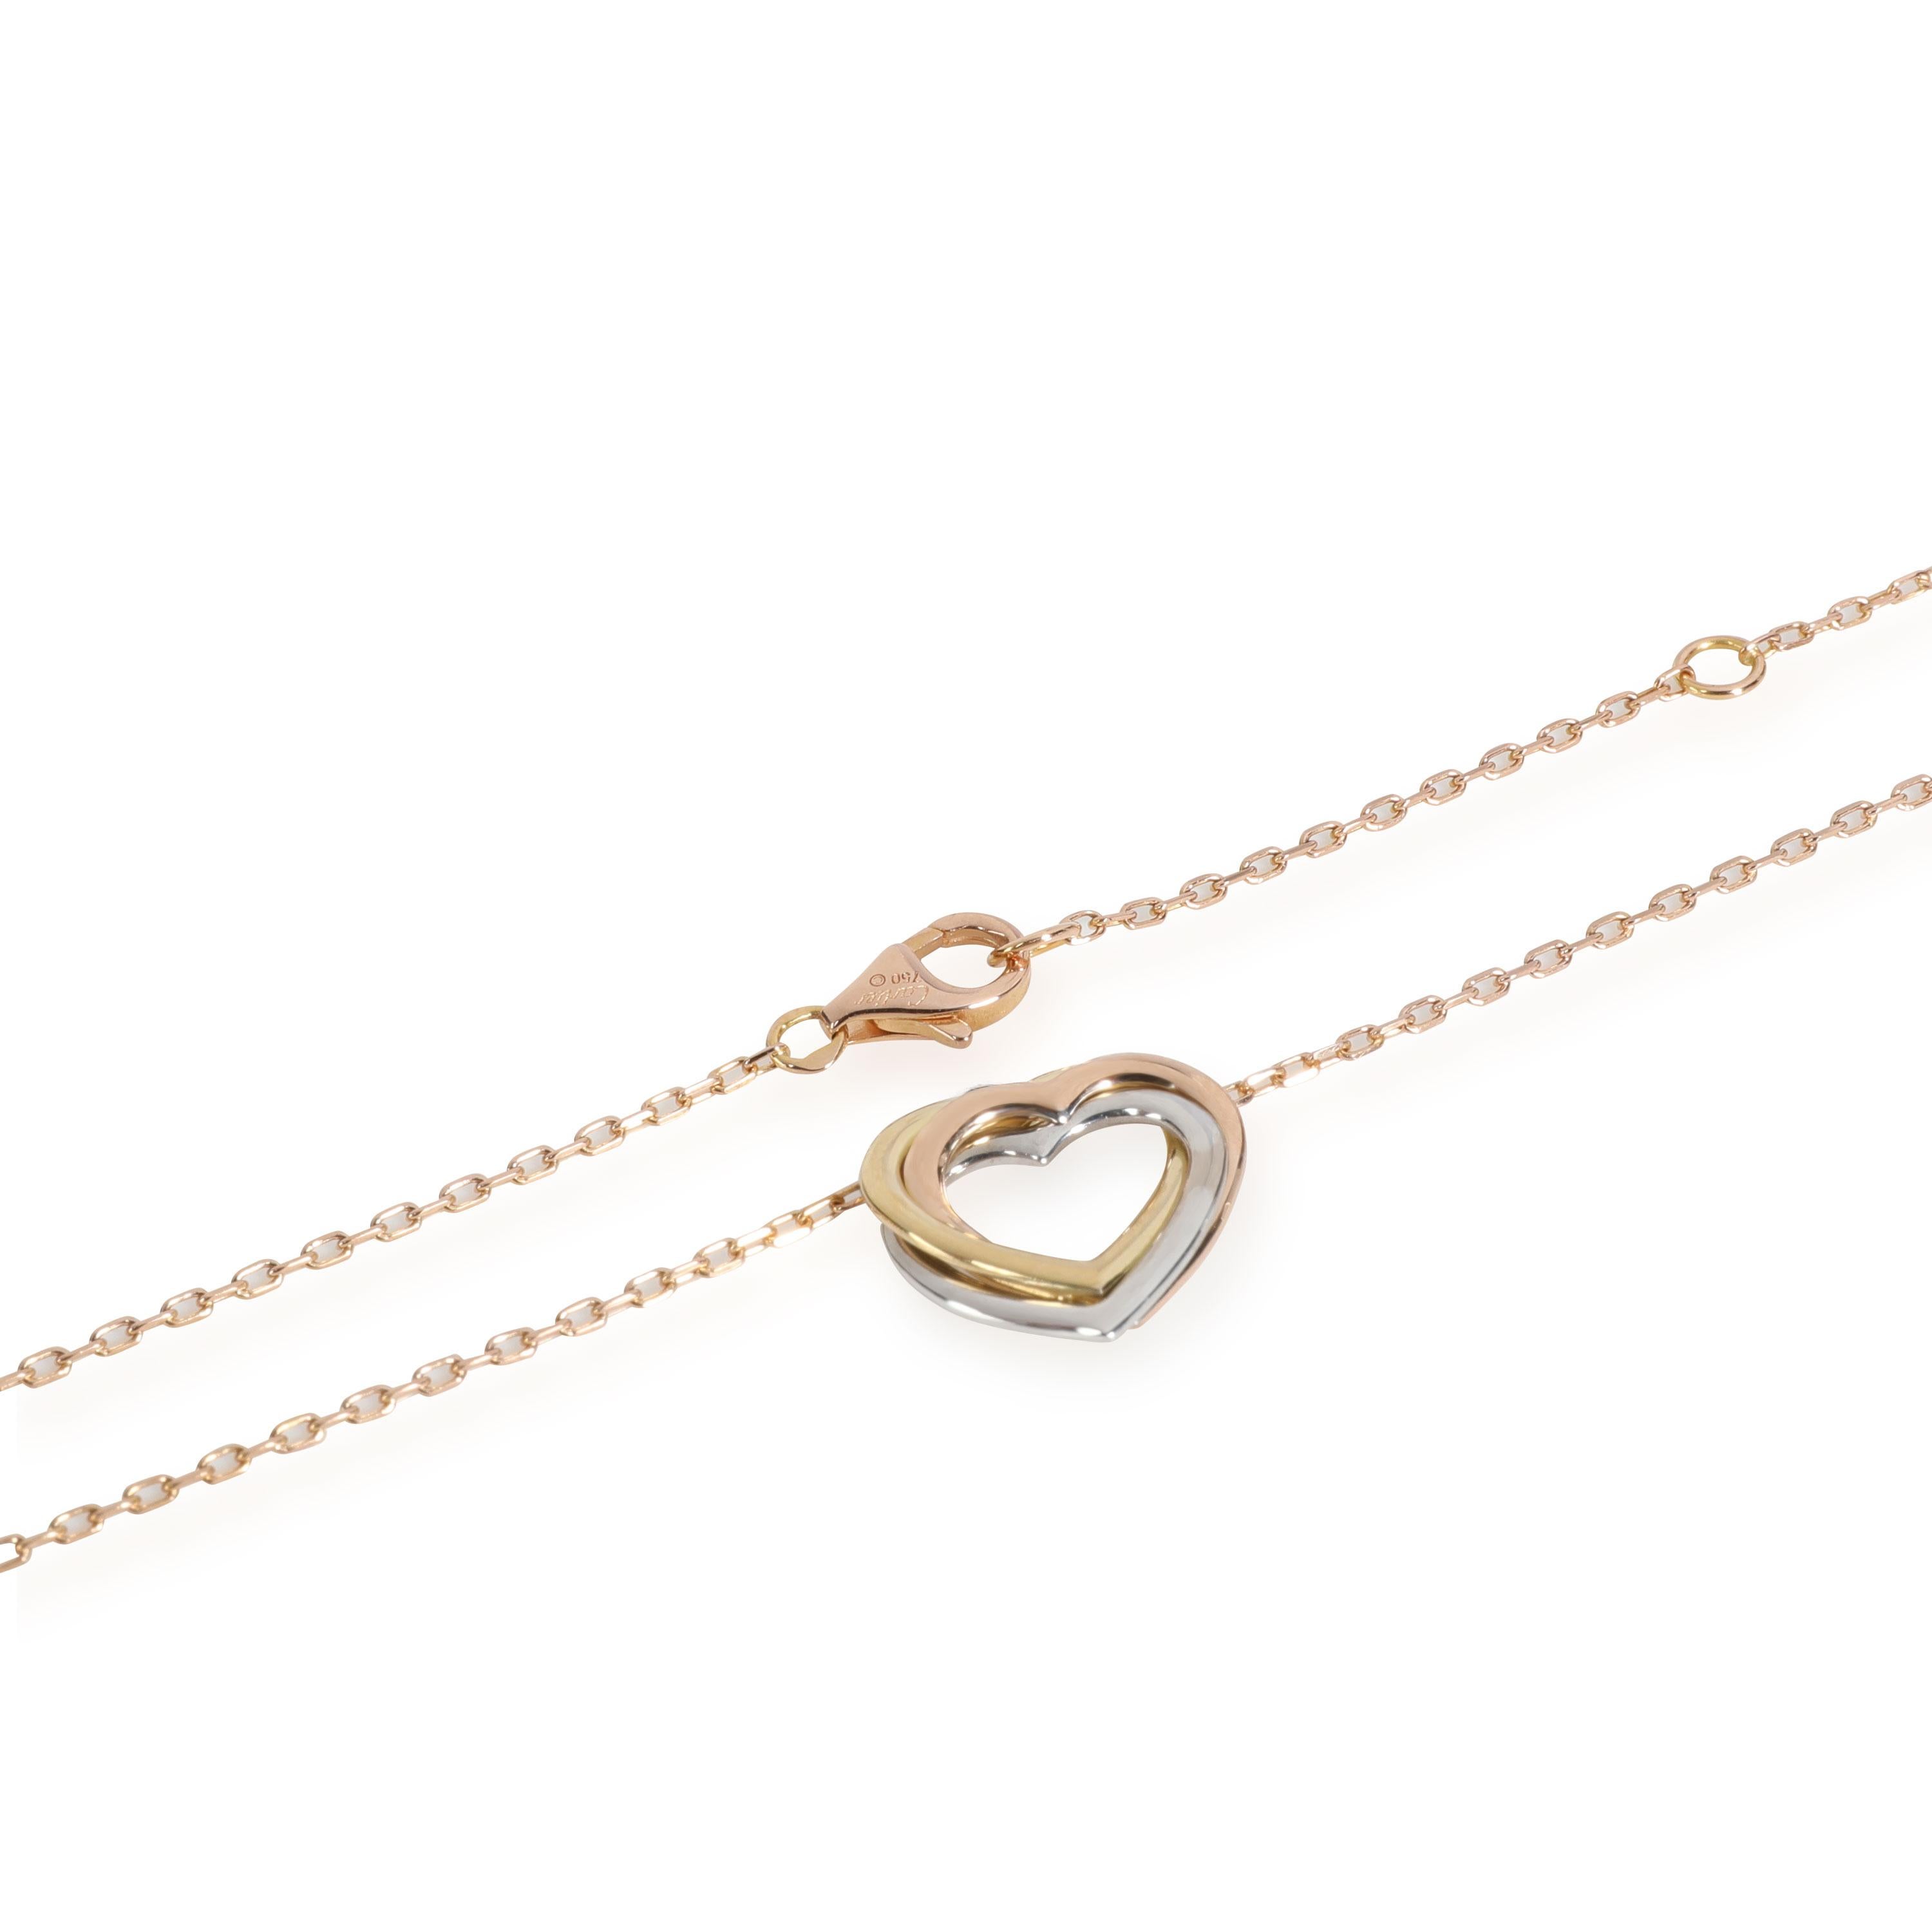 Modern Cartier Trinity Necklace in 18K 3 Tone Gold